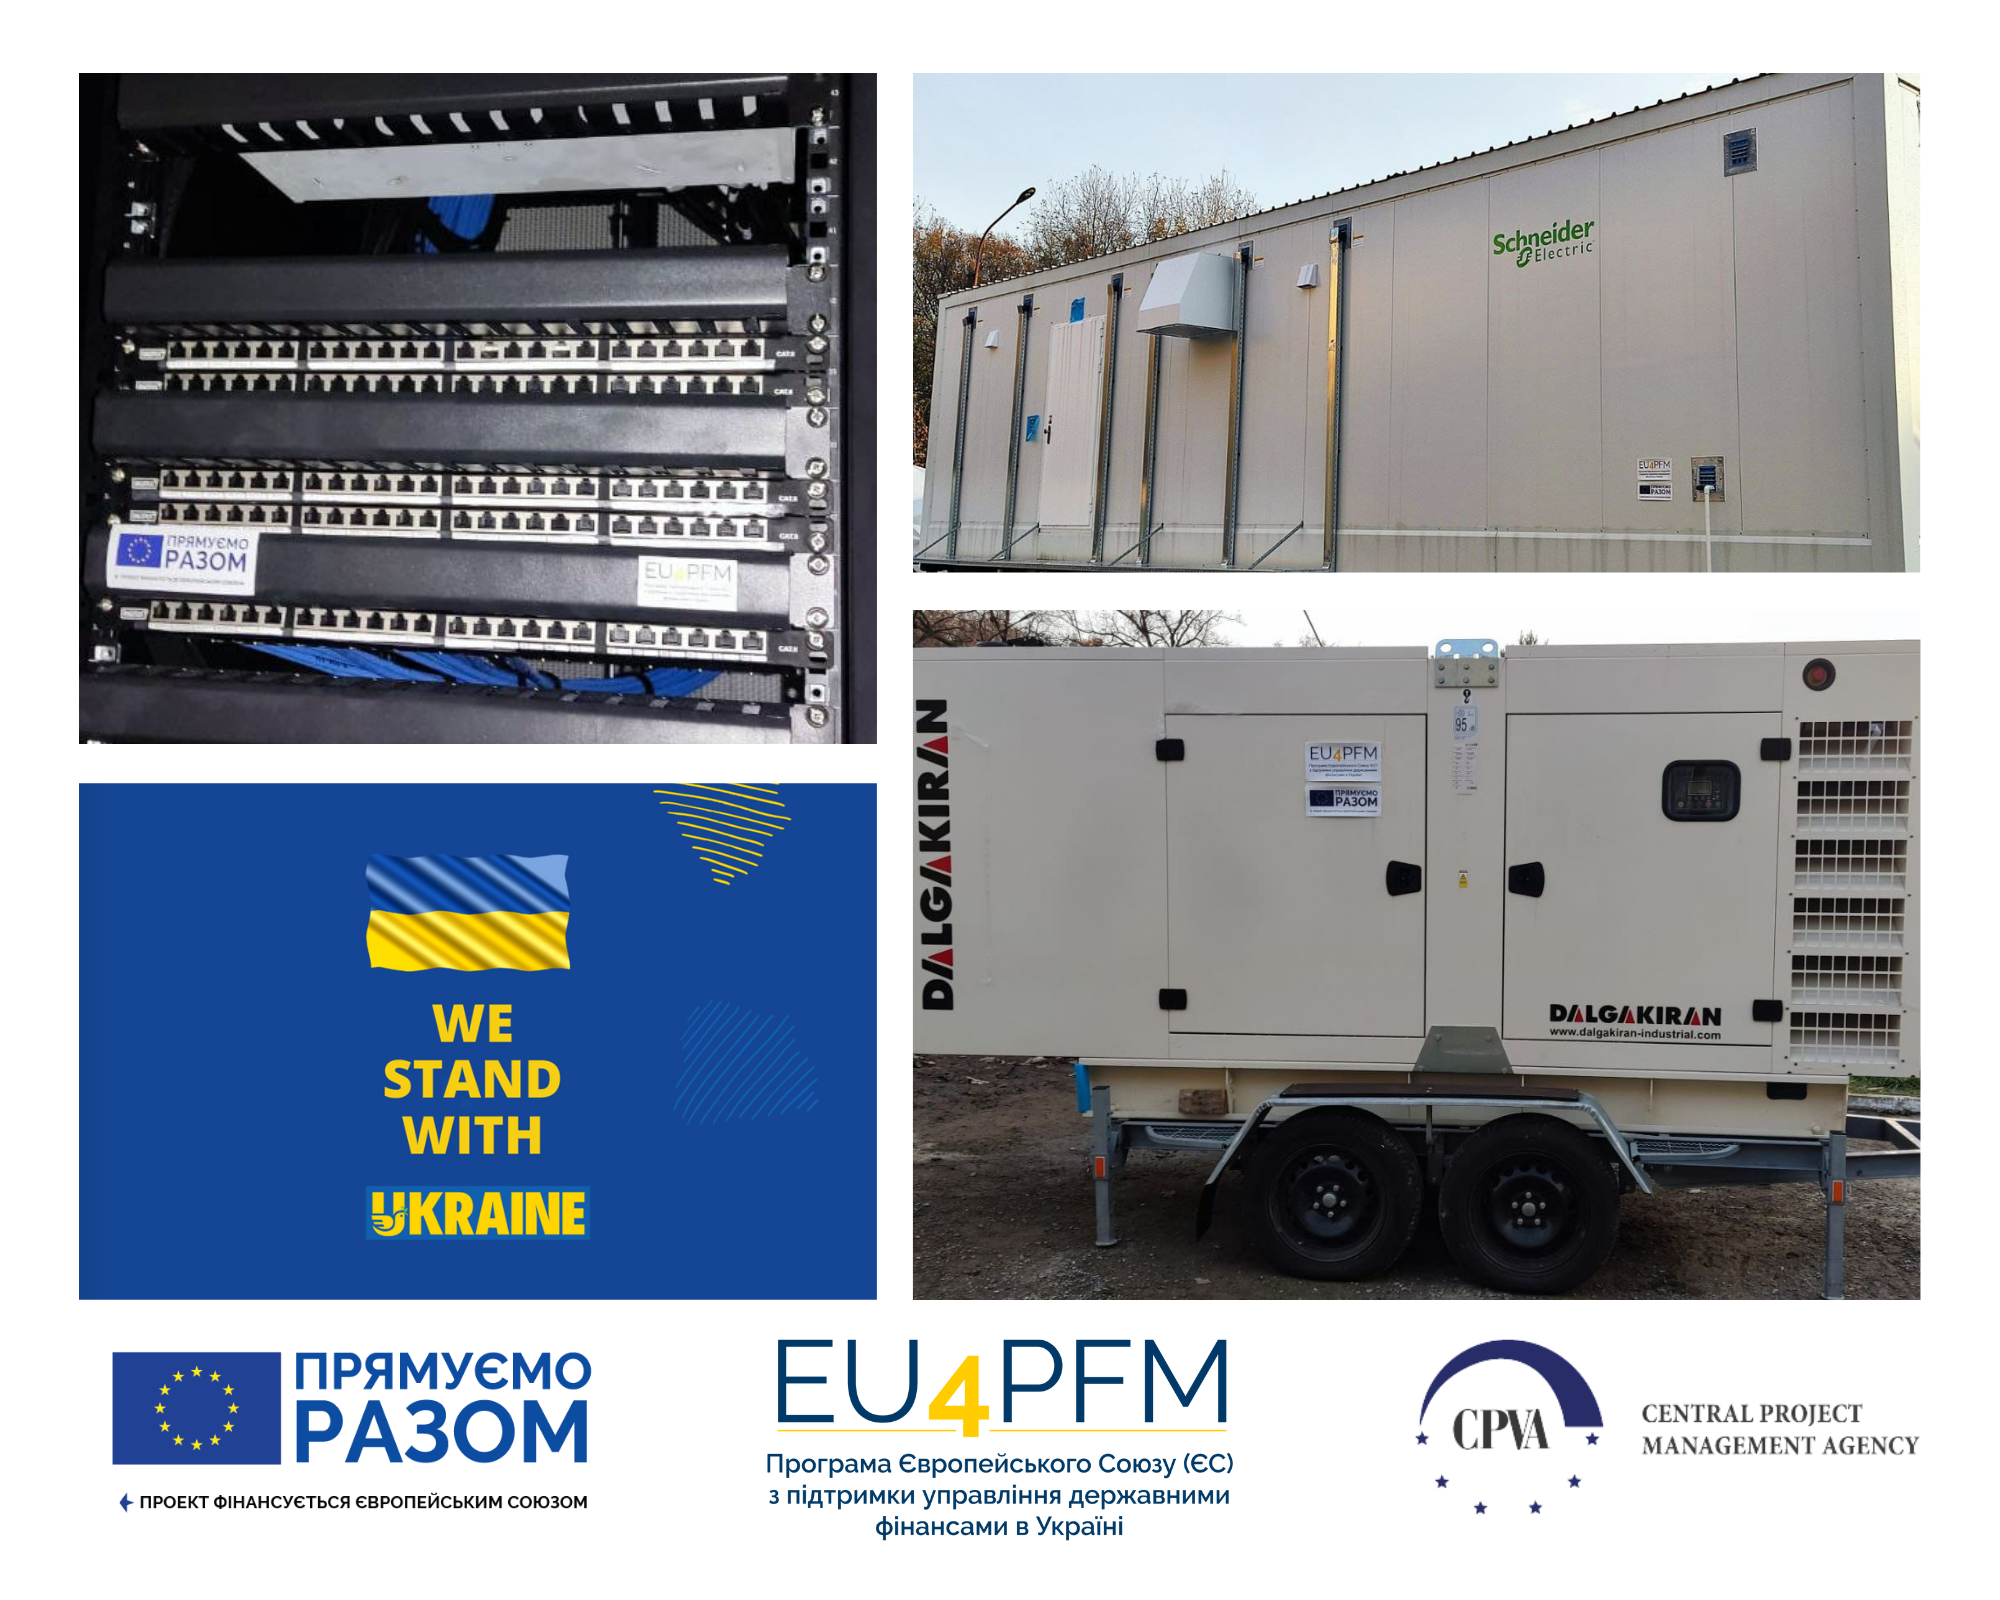 New backup data center for the State Customs Service of Ukraine is equipped and prepared for launching.